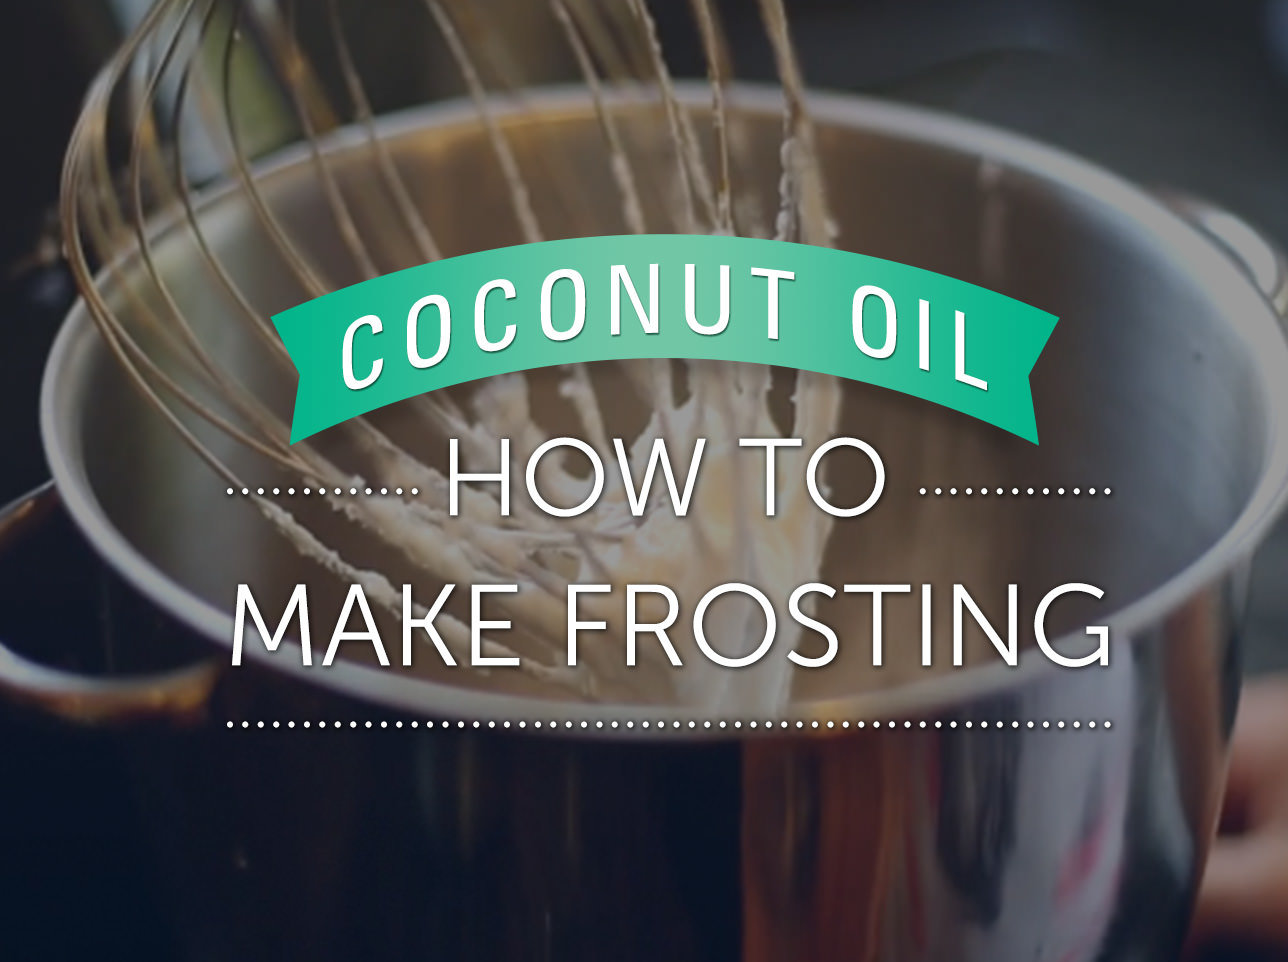 Learn how to make frosting with LouAna Coconut Oil.